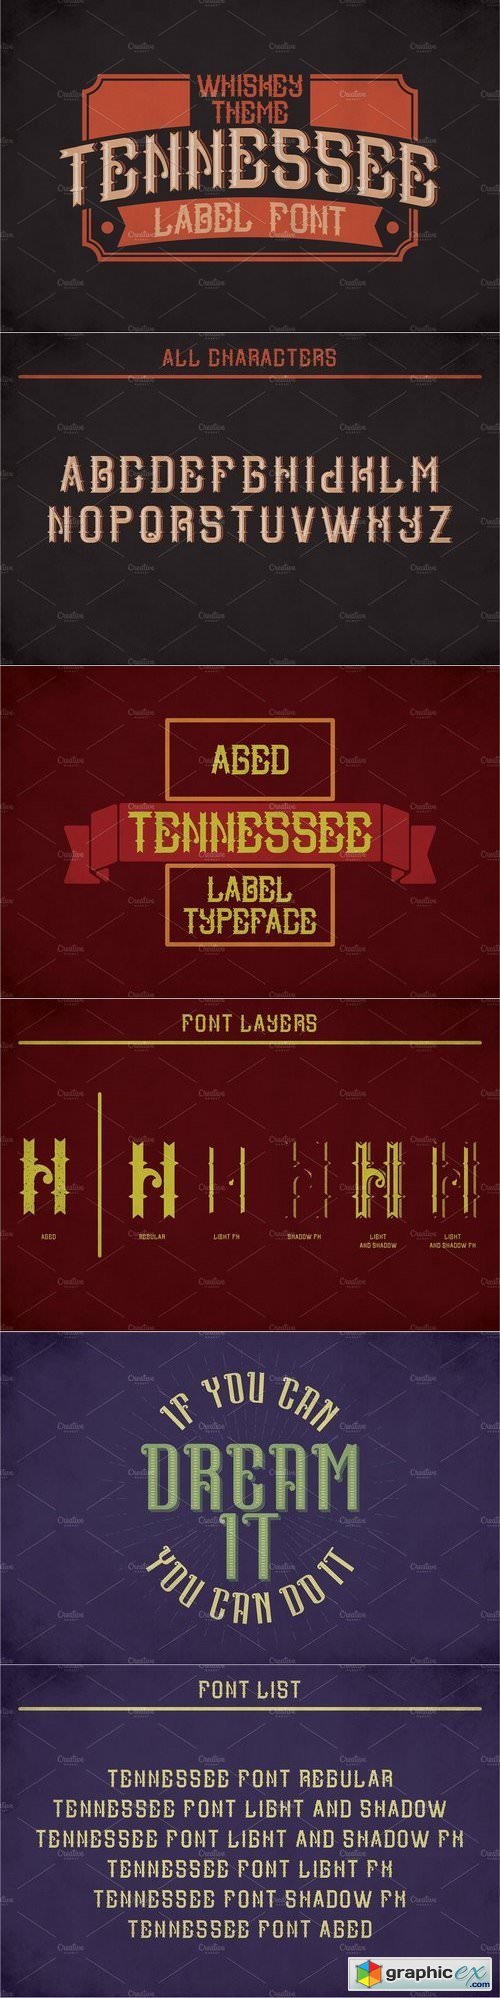 Tennessee Vintage Label Typeface